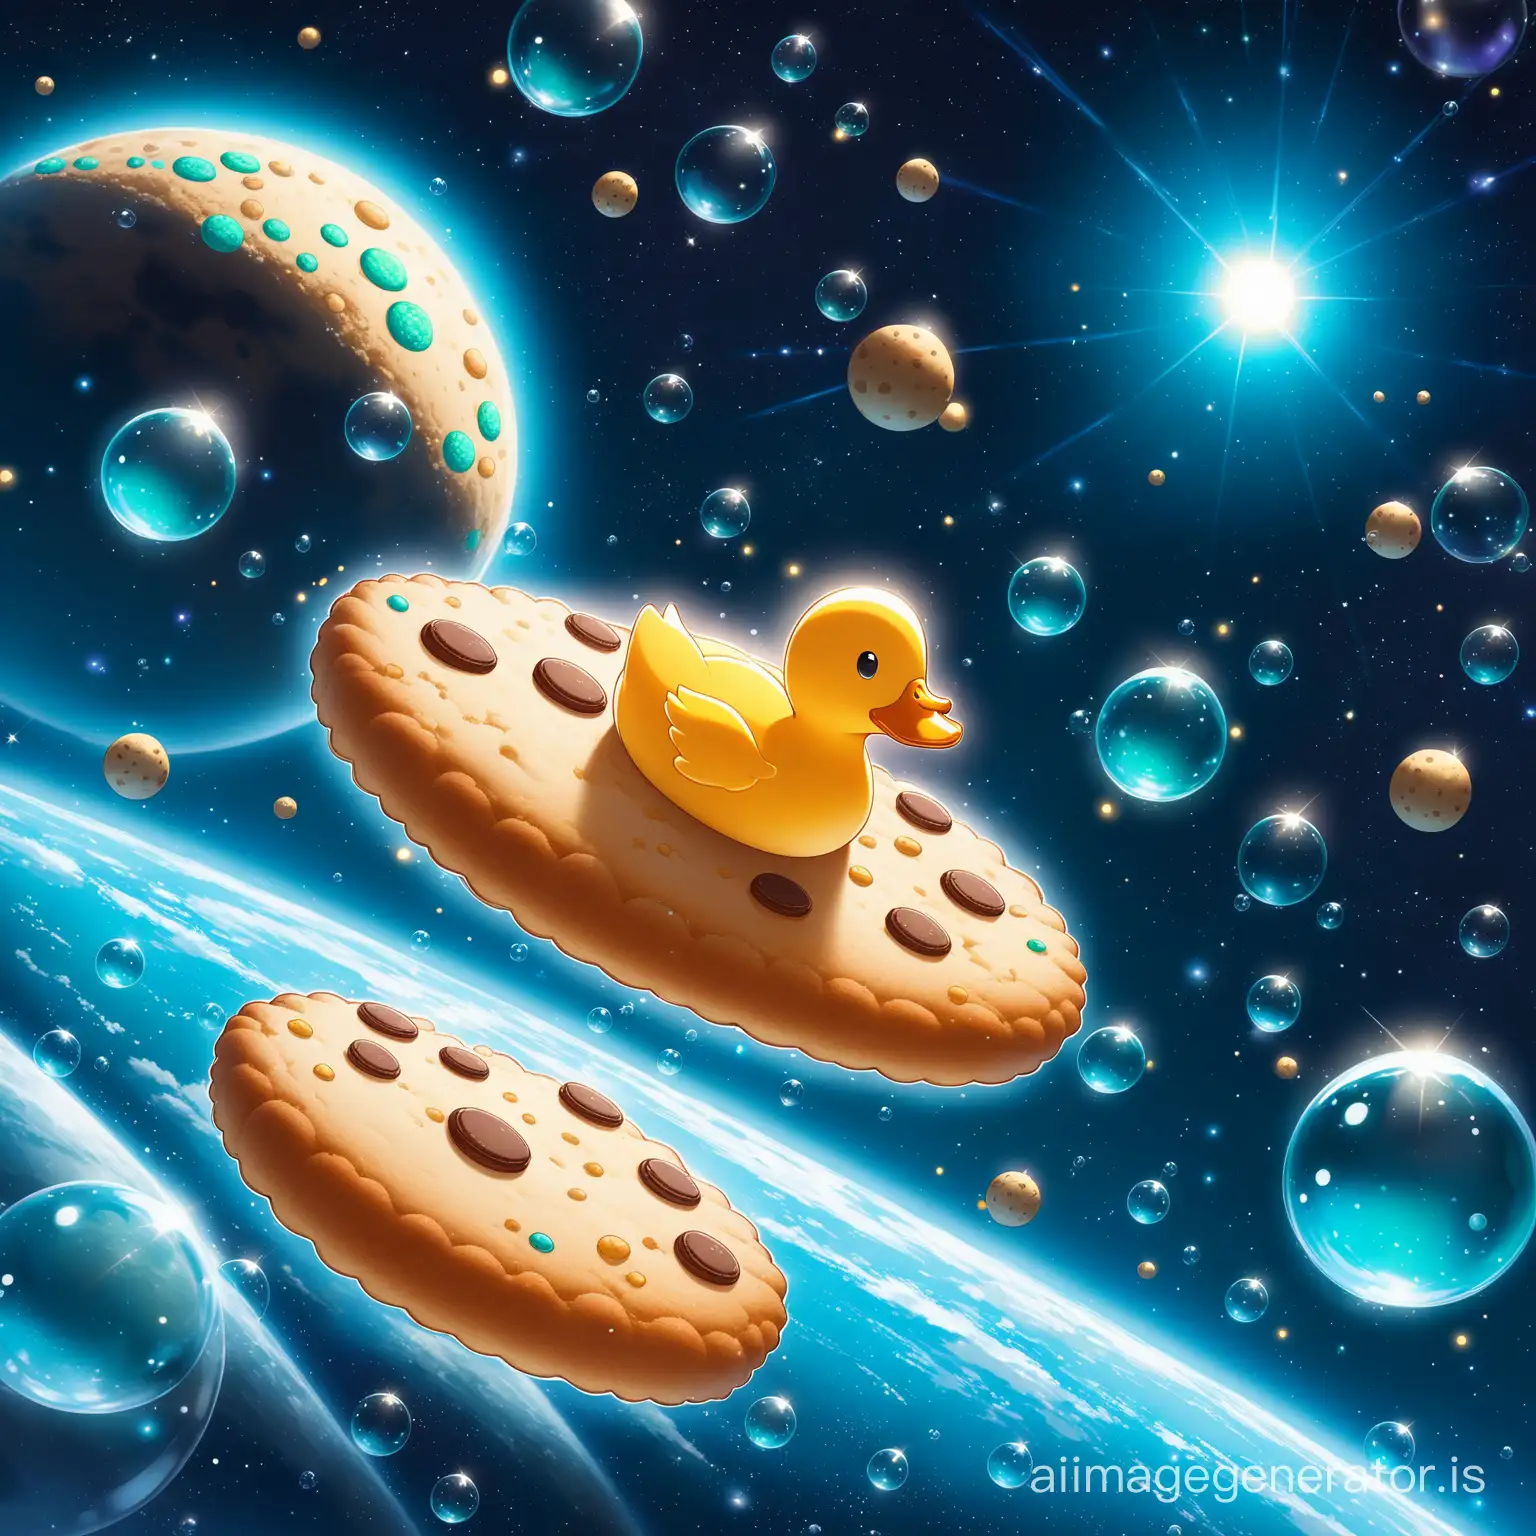 A little cute duck flying on the space super
i see many green rocket in space in background
detail and High Quality
big and blue and floating bubbles are seen everywhere
also big cookies floating bubbles are seen 
Details are evident beautifully and with great precision
Lighting is carefully observed
